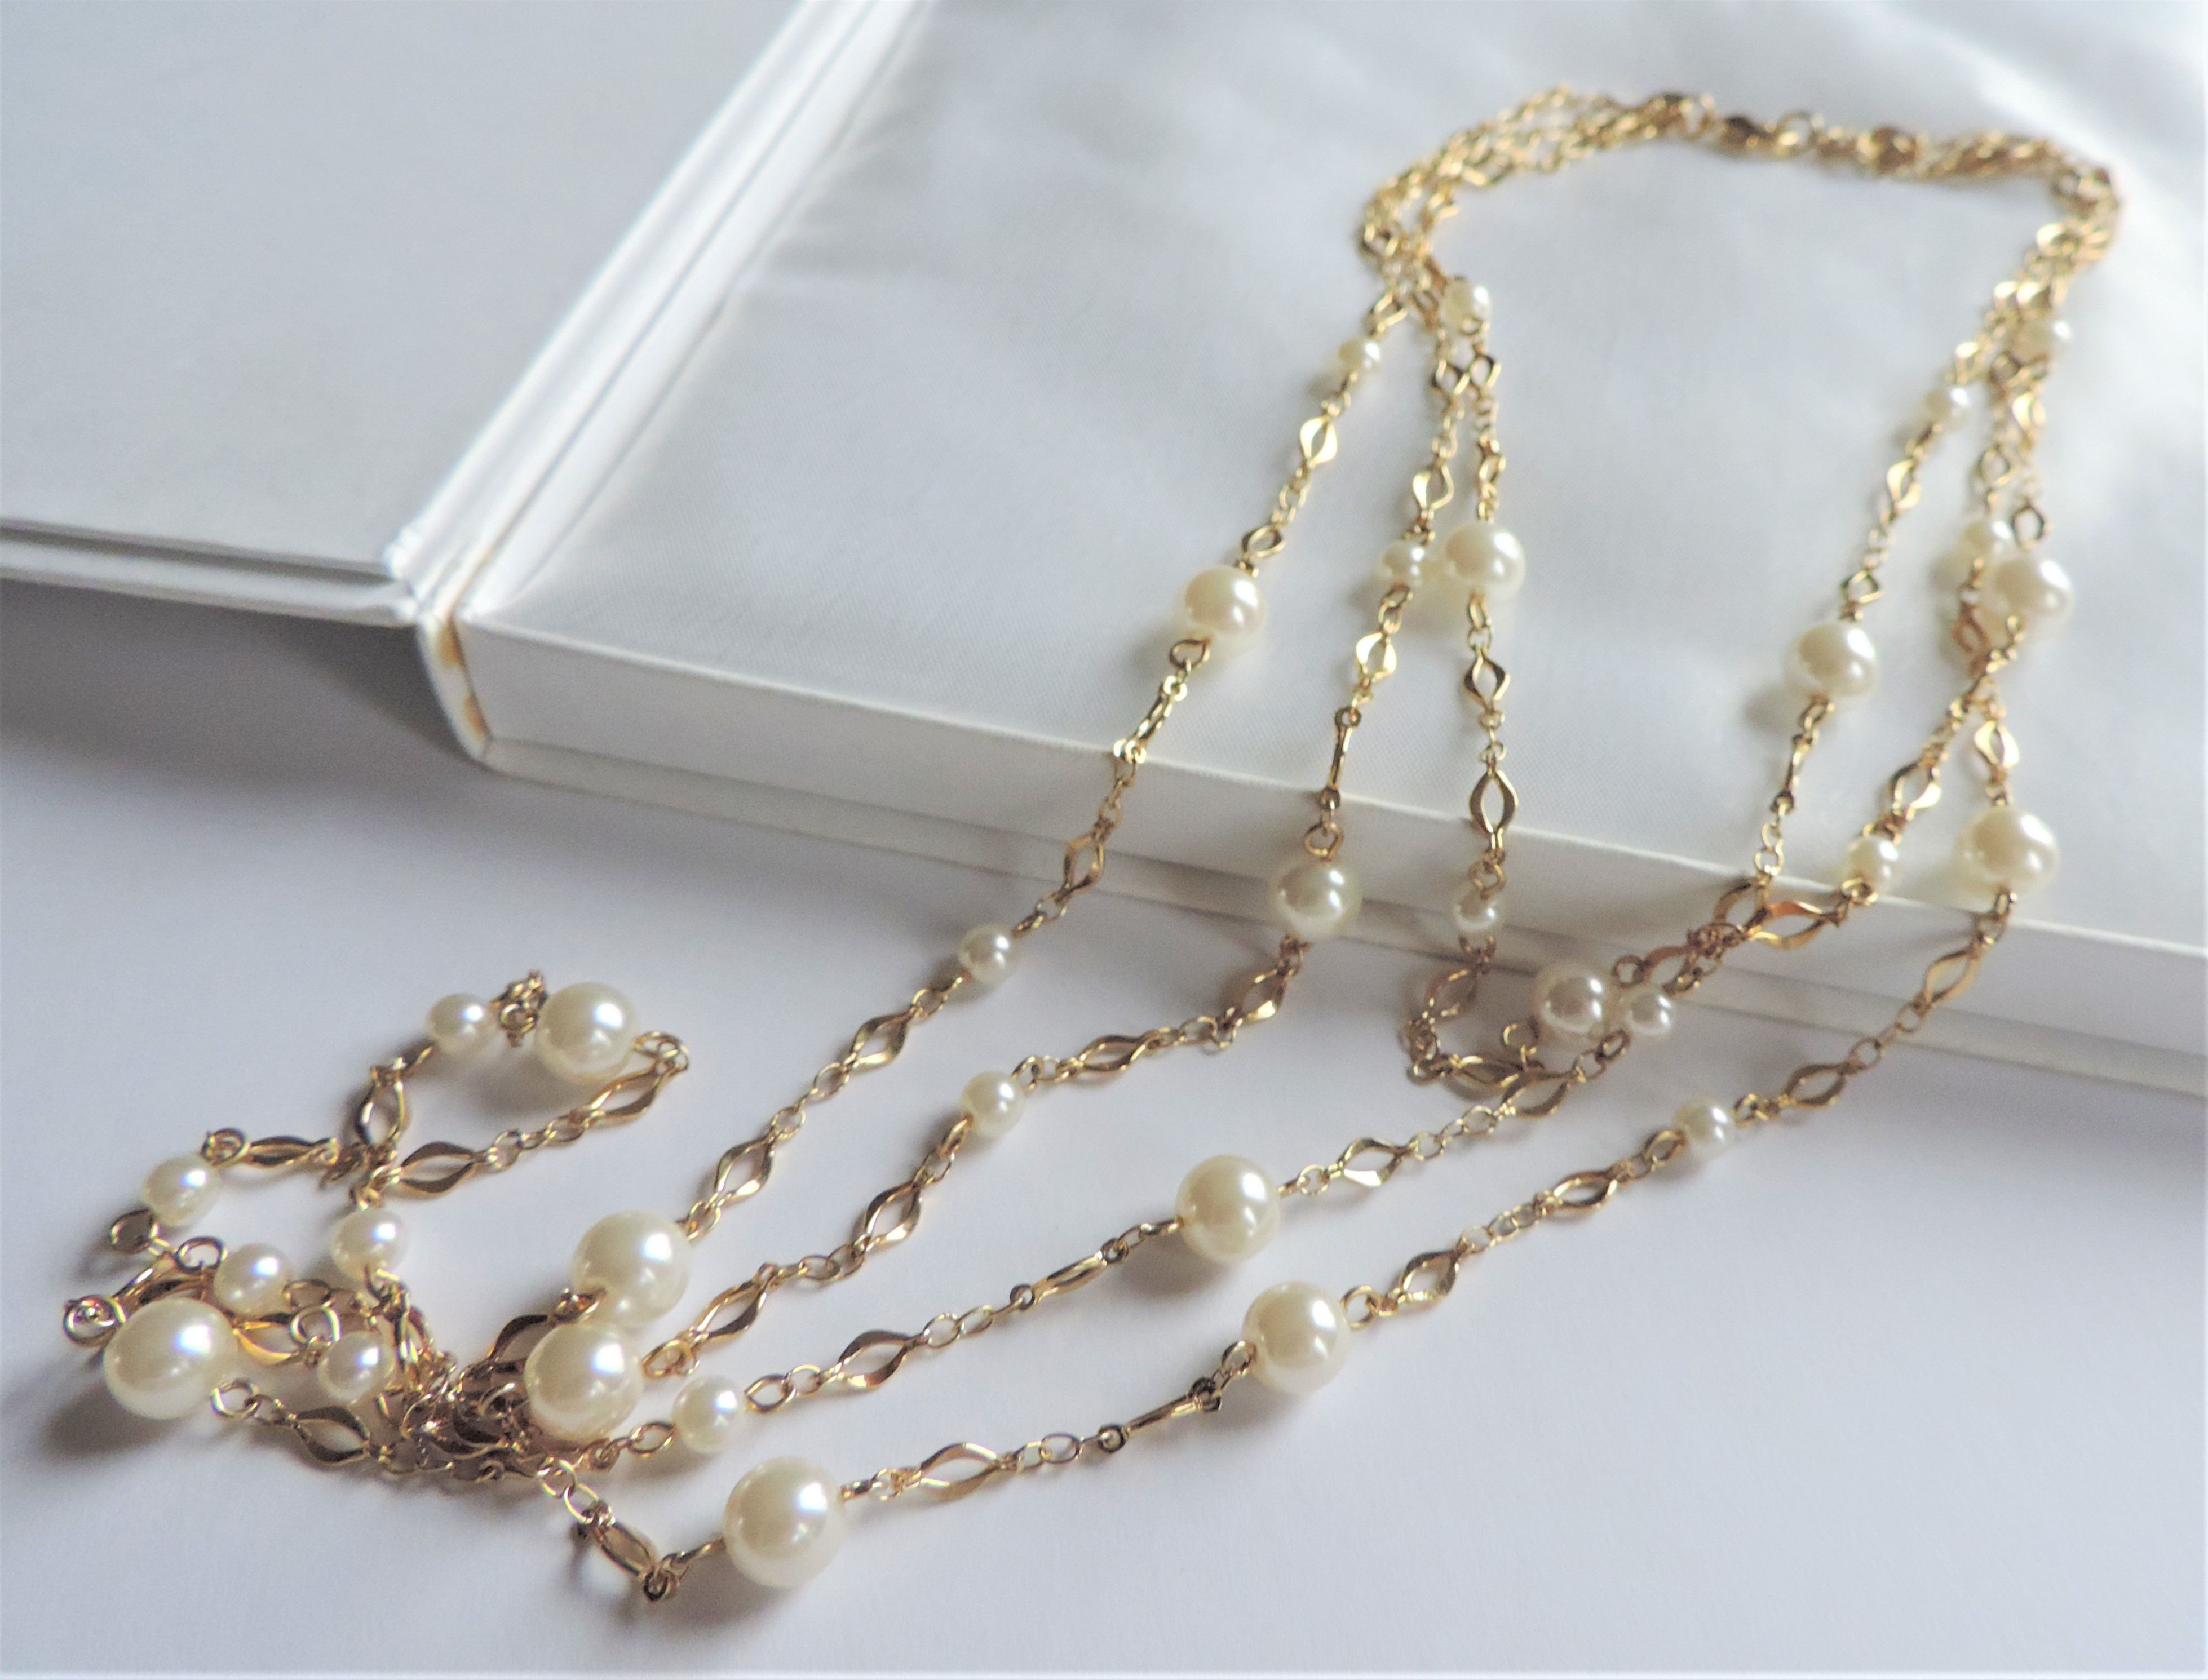 26 inch Triple Strand Gold Plated Chain Pearl Necklace with Gift Pouch - Image 2 of 3